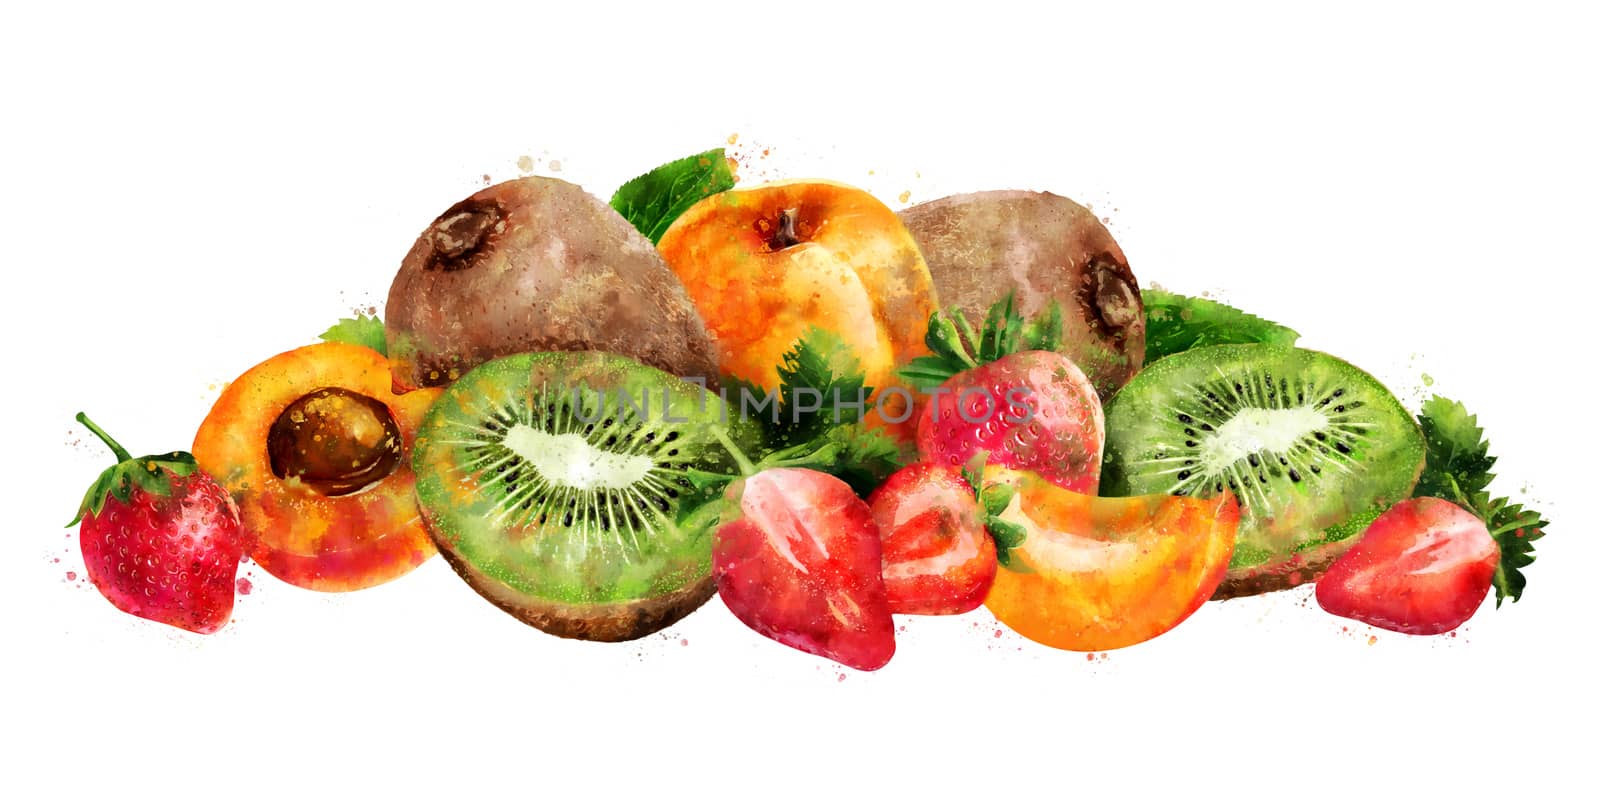 Apricot, strawberry and kiwi hand-painted illustration on a white background